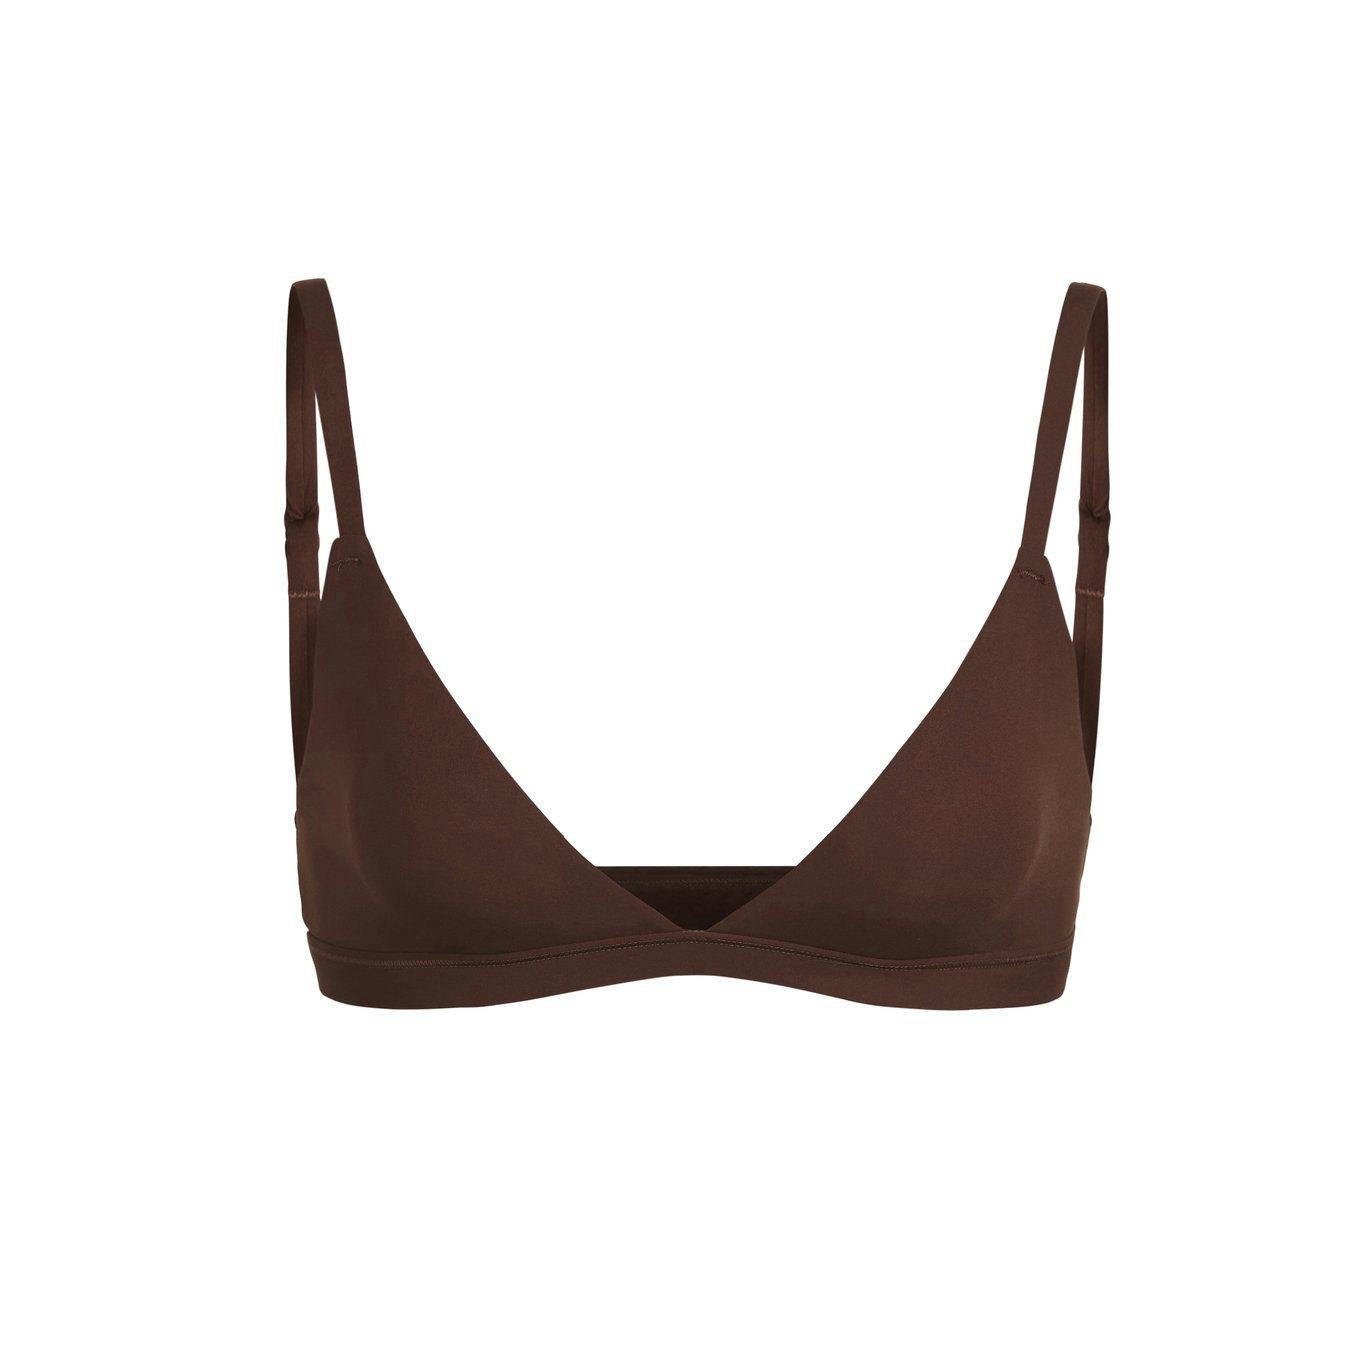 10 Bralettes You Can Lounge Around The House In